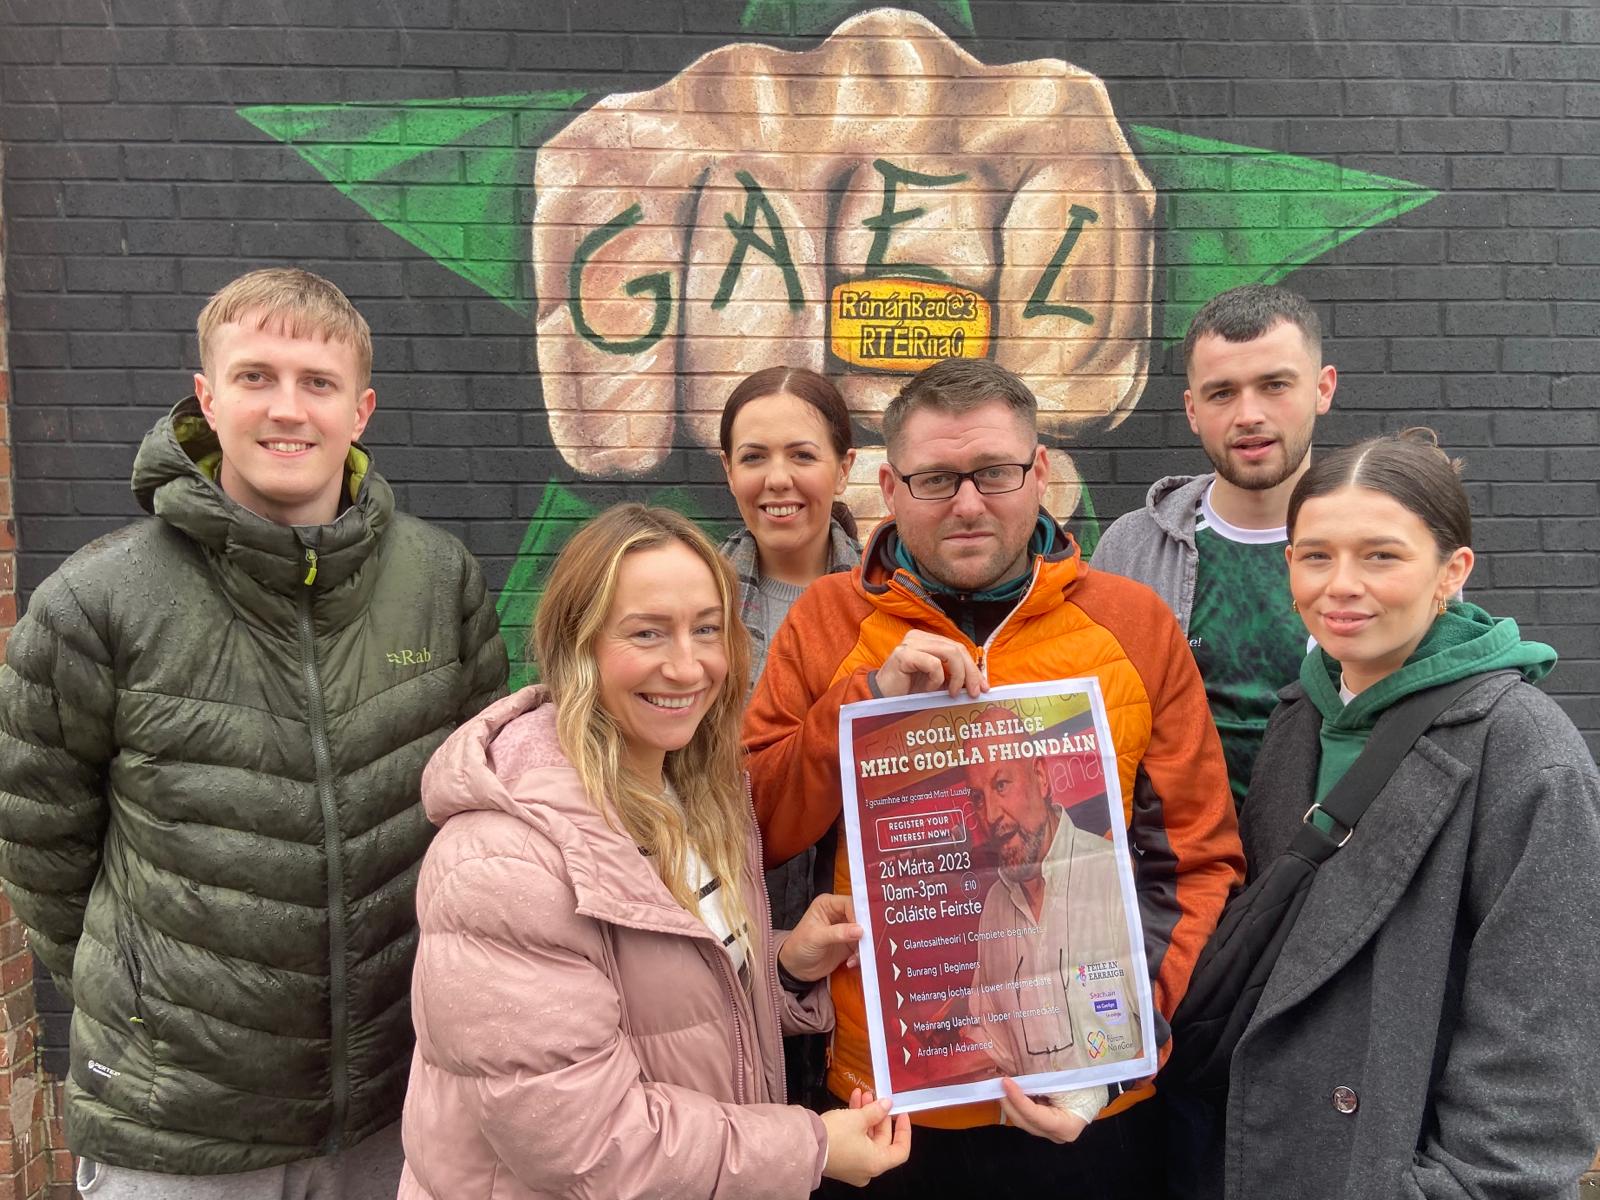 COURSE: Gearóidín Mhic Mhathúna, Sinéad Nic Colaim, Órla Nig Oirc, Brian Mac An tSionnaigh, Eoghan Ó Garmaile and Laochra Mac Iomaire with the poster for to register for the course in memory of Matt Lundy